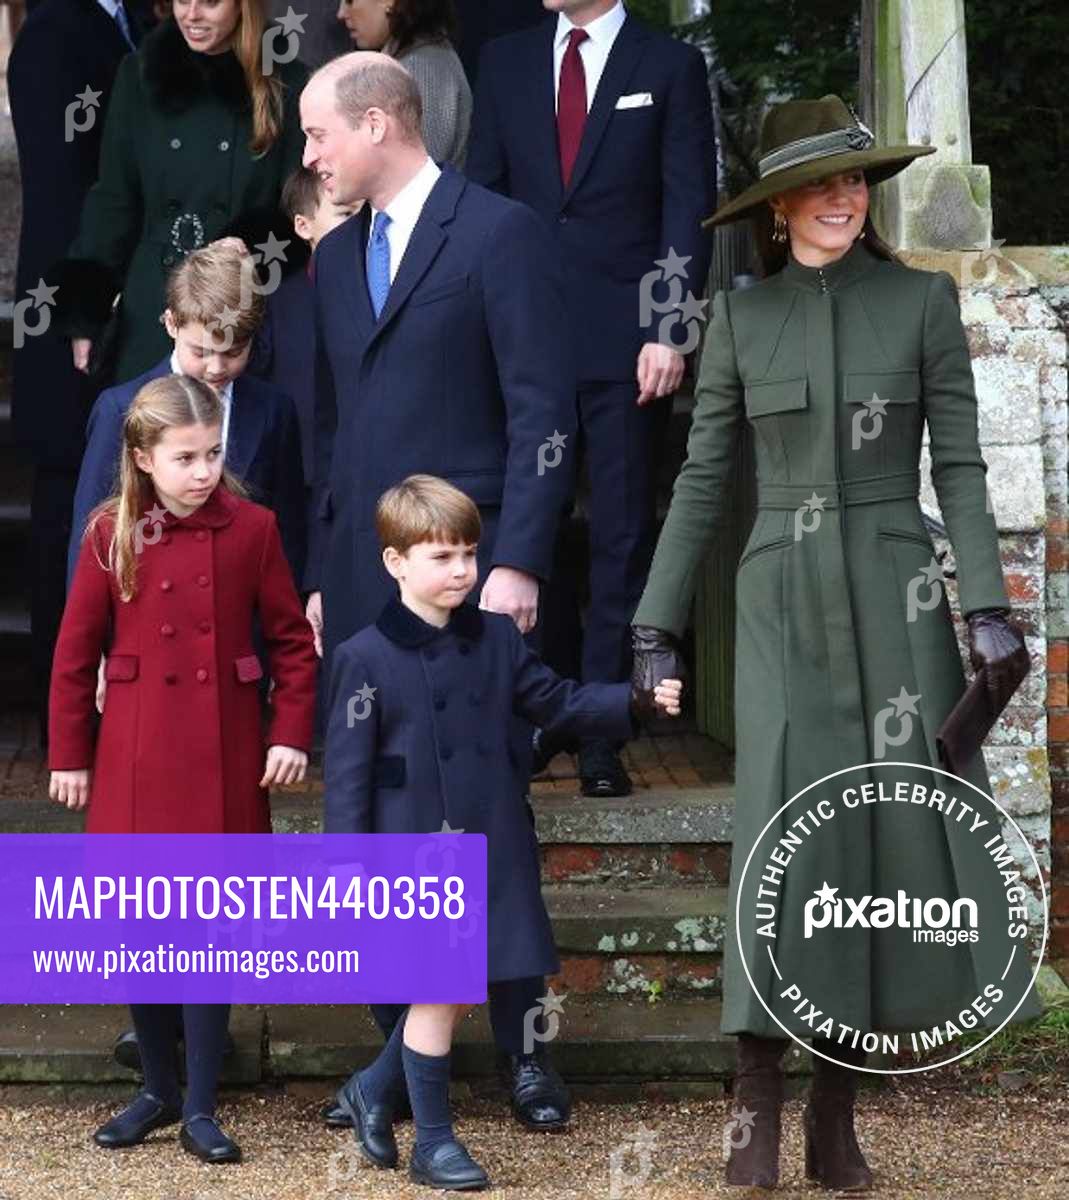 The Royal Family attend Church at Christmas - Princess Charlotte, Prince William, Prince of Wales, Prince George and Prince Louis